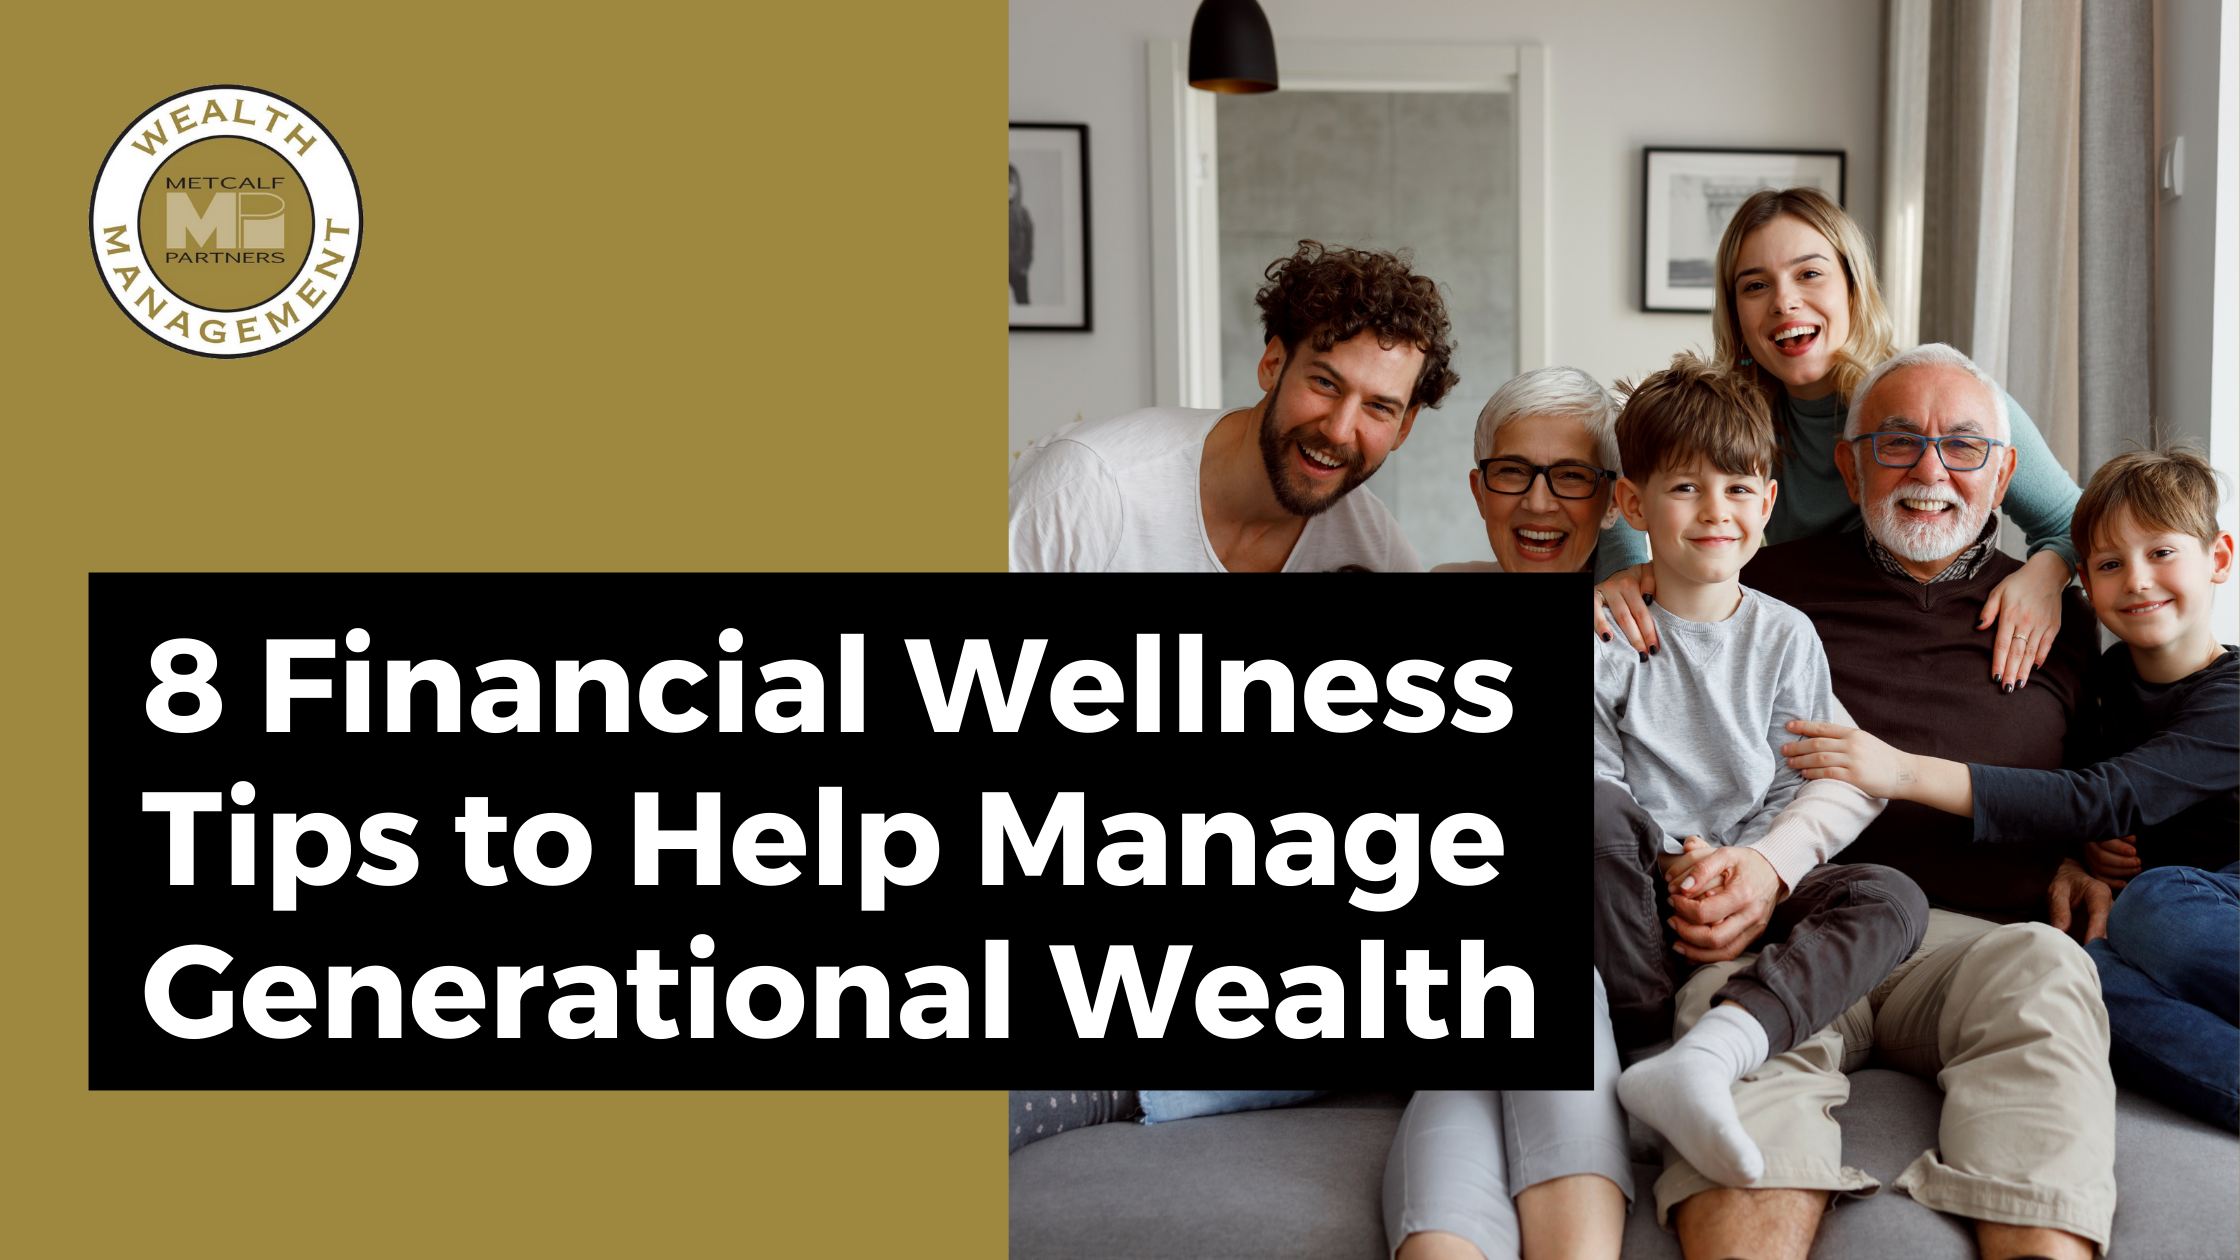 Featured image for “8 Financial Wellness Tips to Help Manage Generational Wealth”